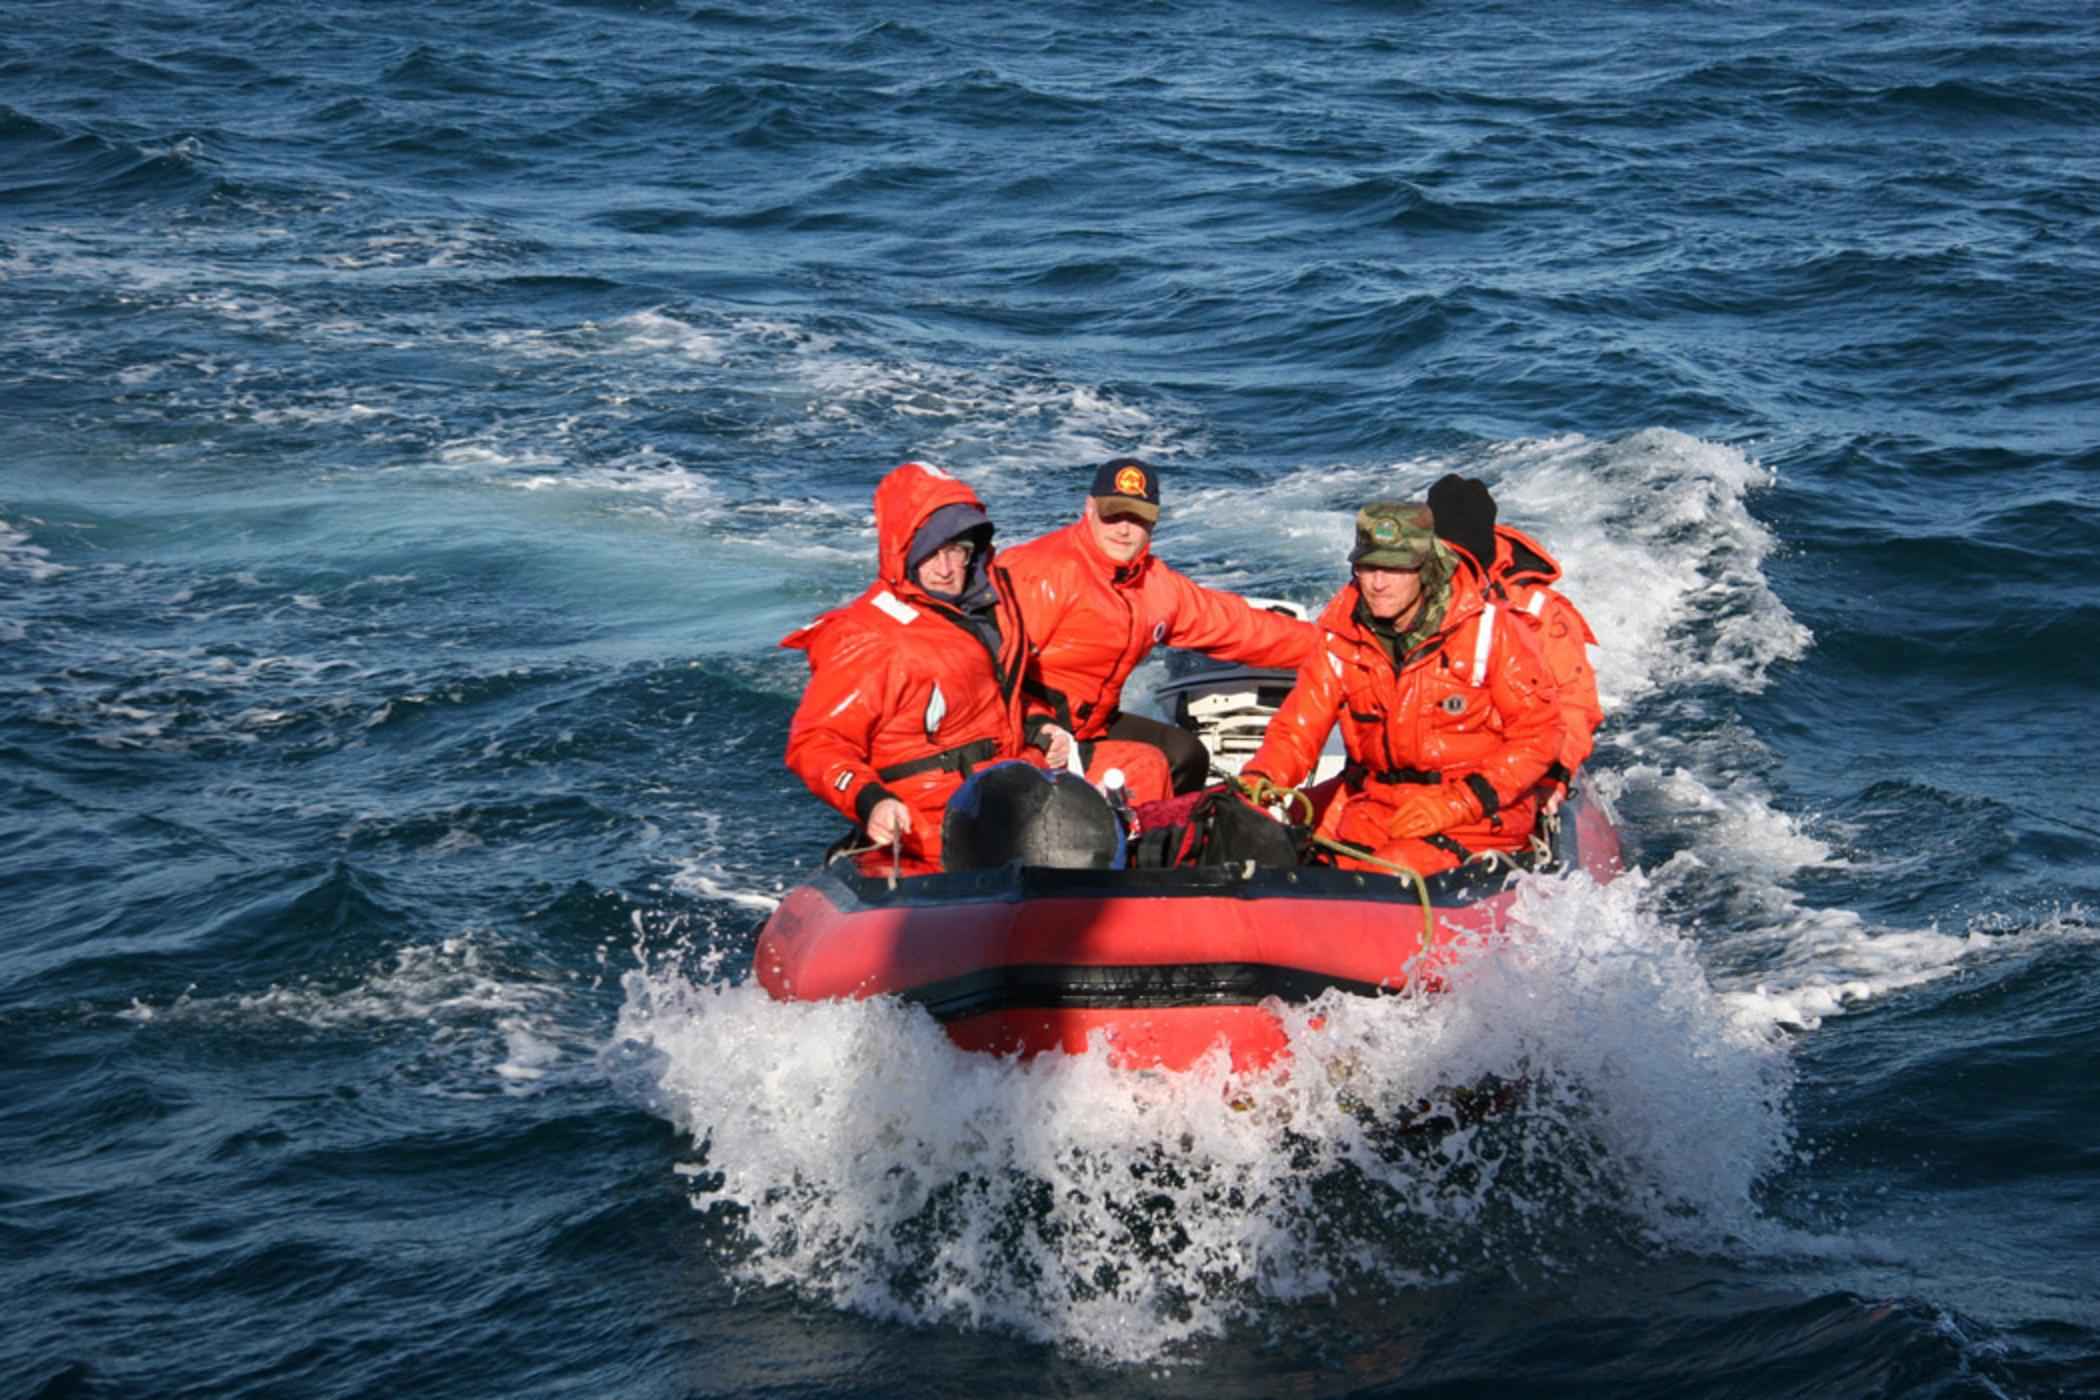 File:Rescue team in a boat.jpg - Wikimedia Commons